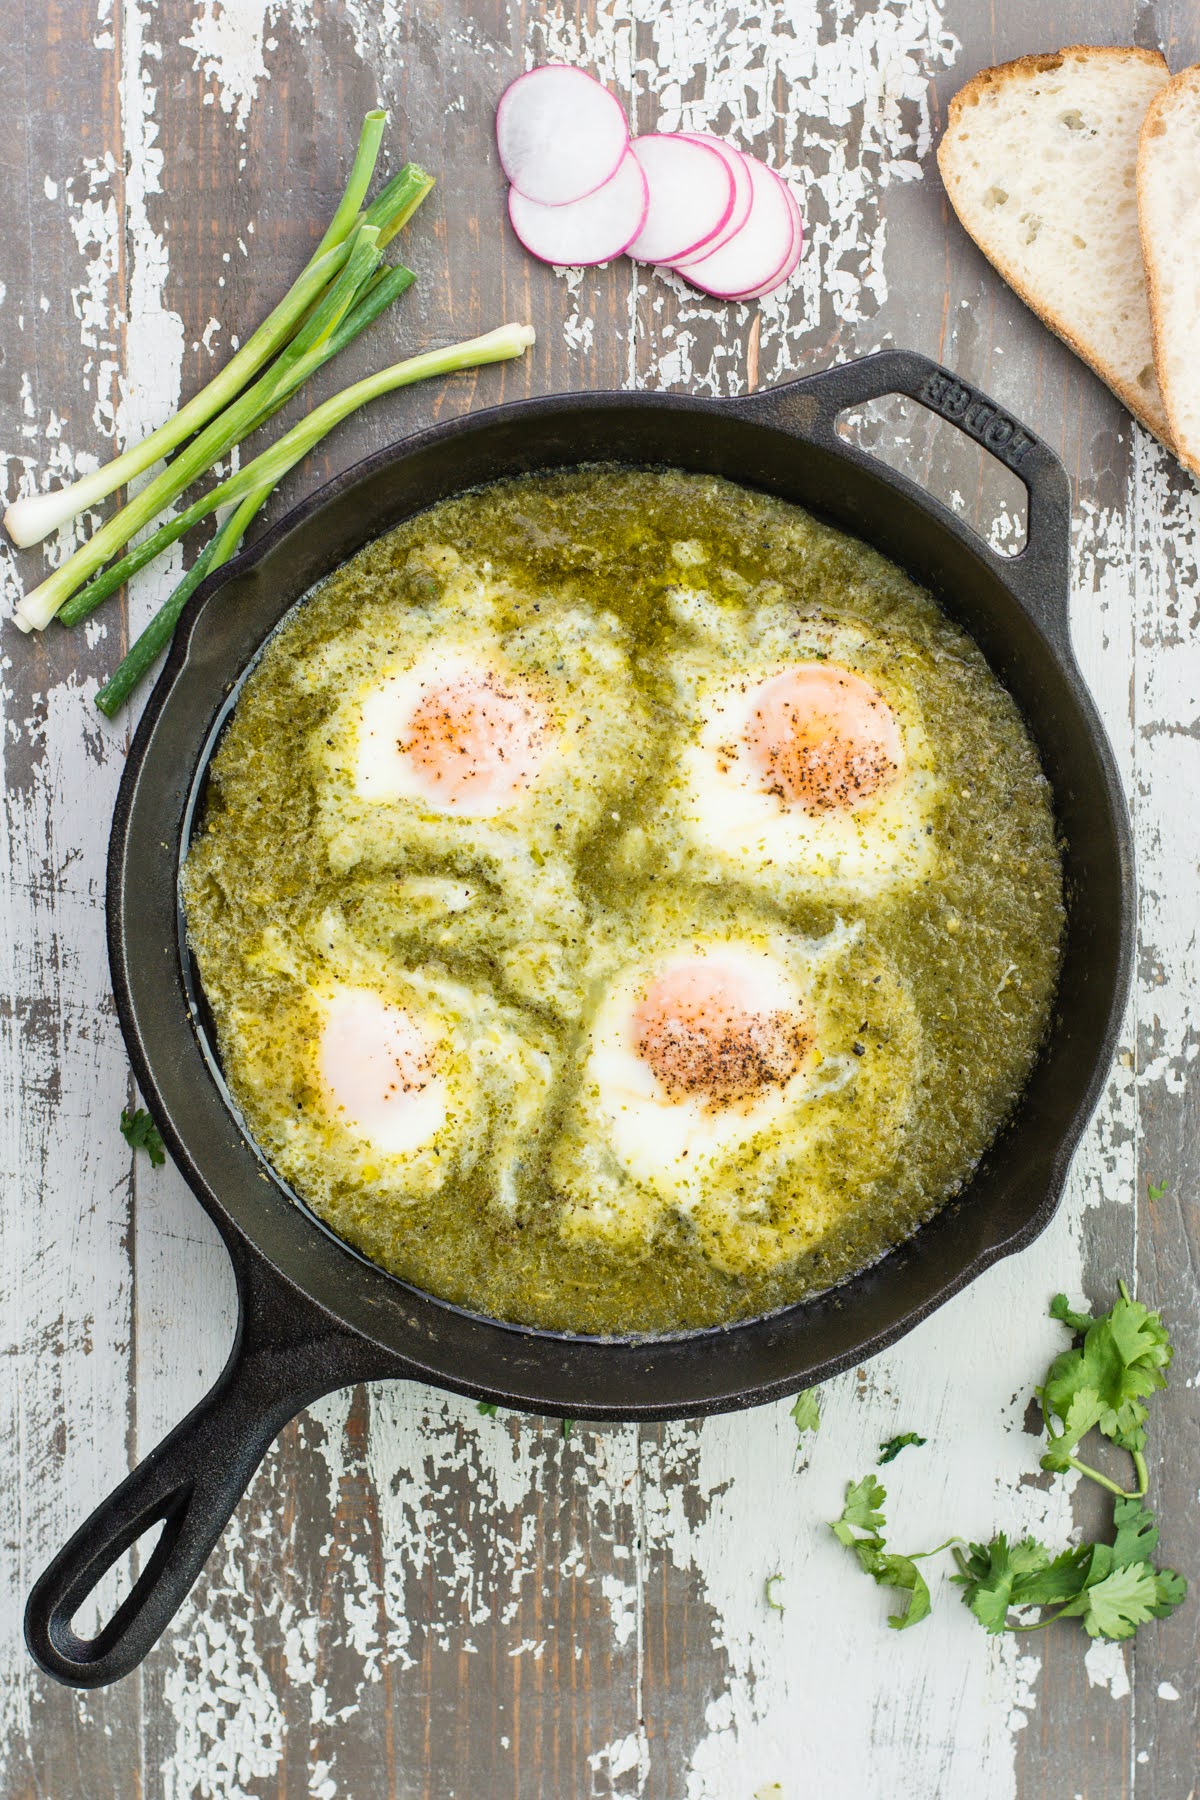 Salsa verde with baked eggs fresh out of the oven